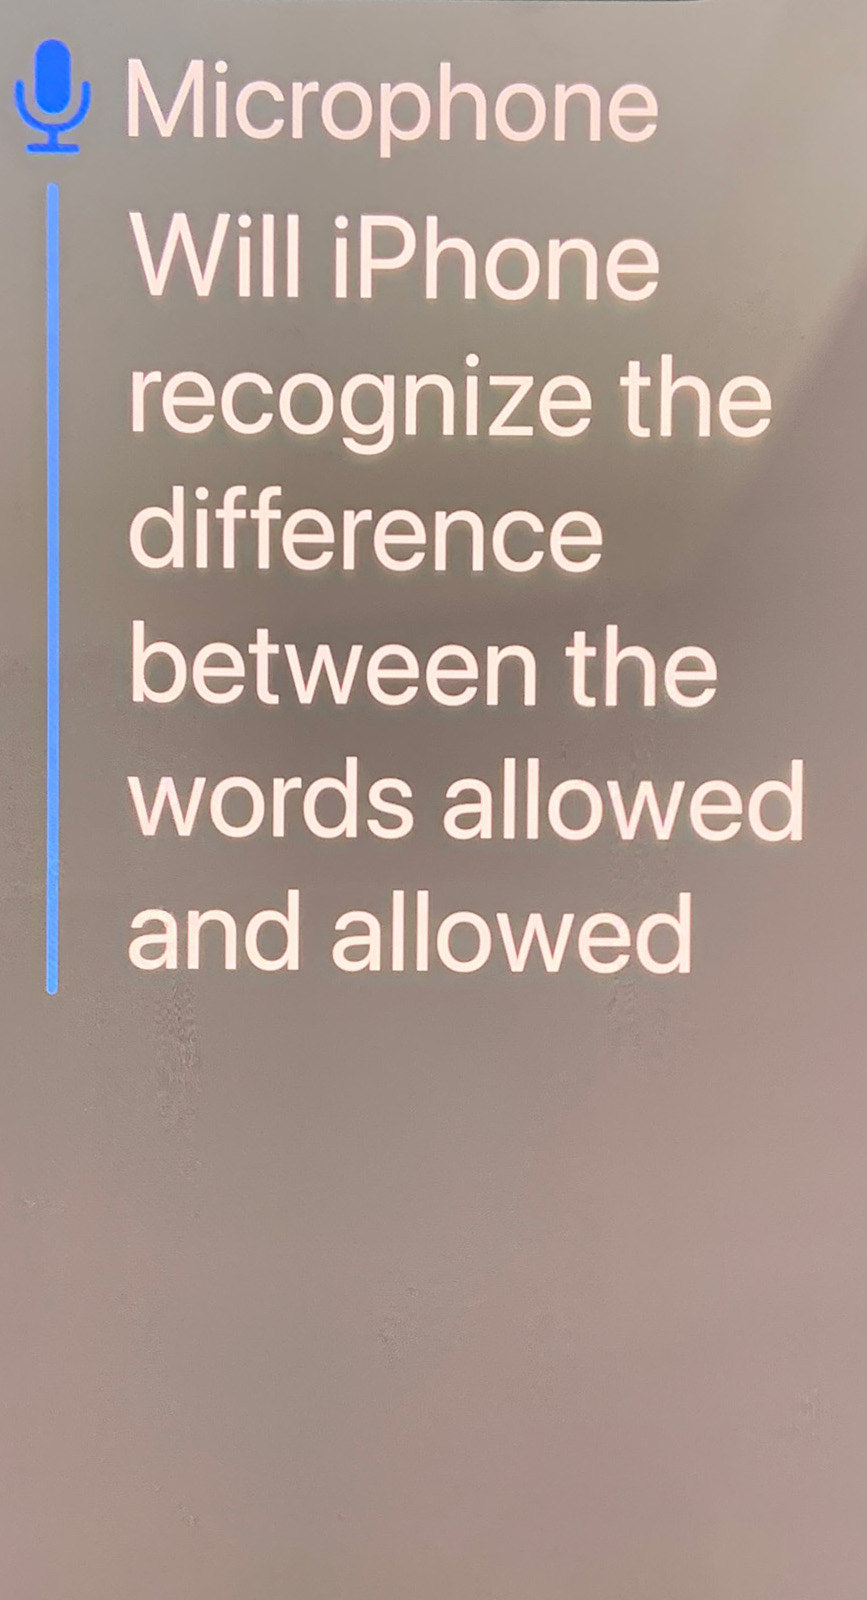 Screenshot of iPhone live captions. The microphone is on with the text Will iPhone recognize the difference between the words allowed and allowed.